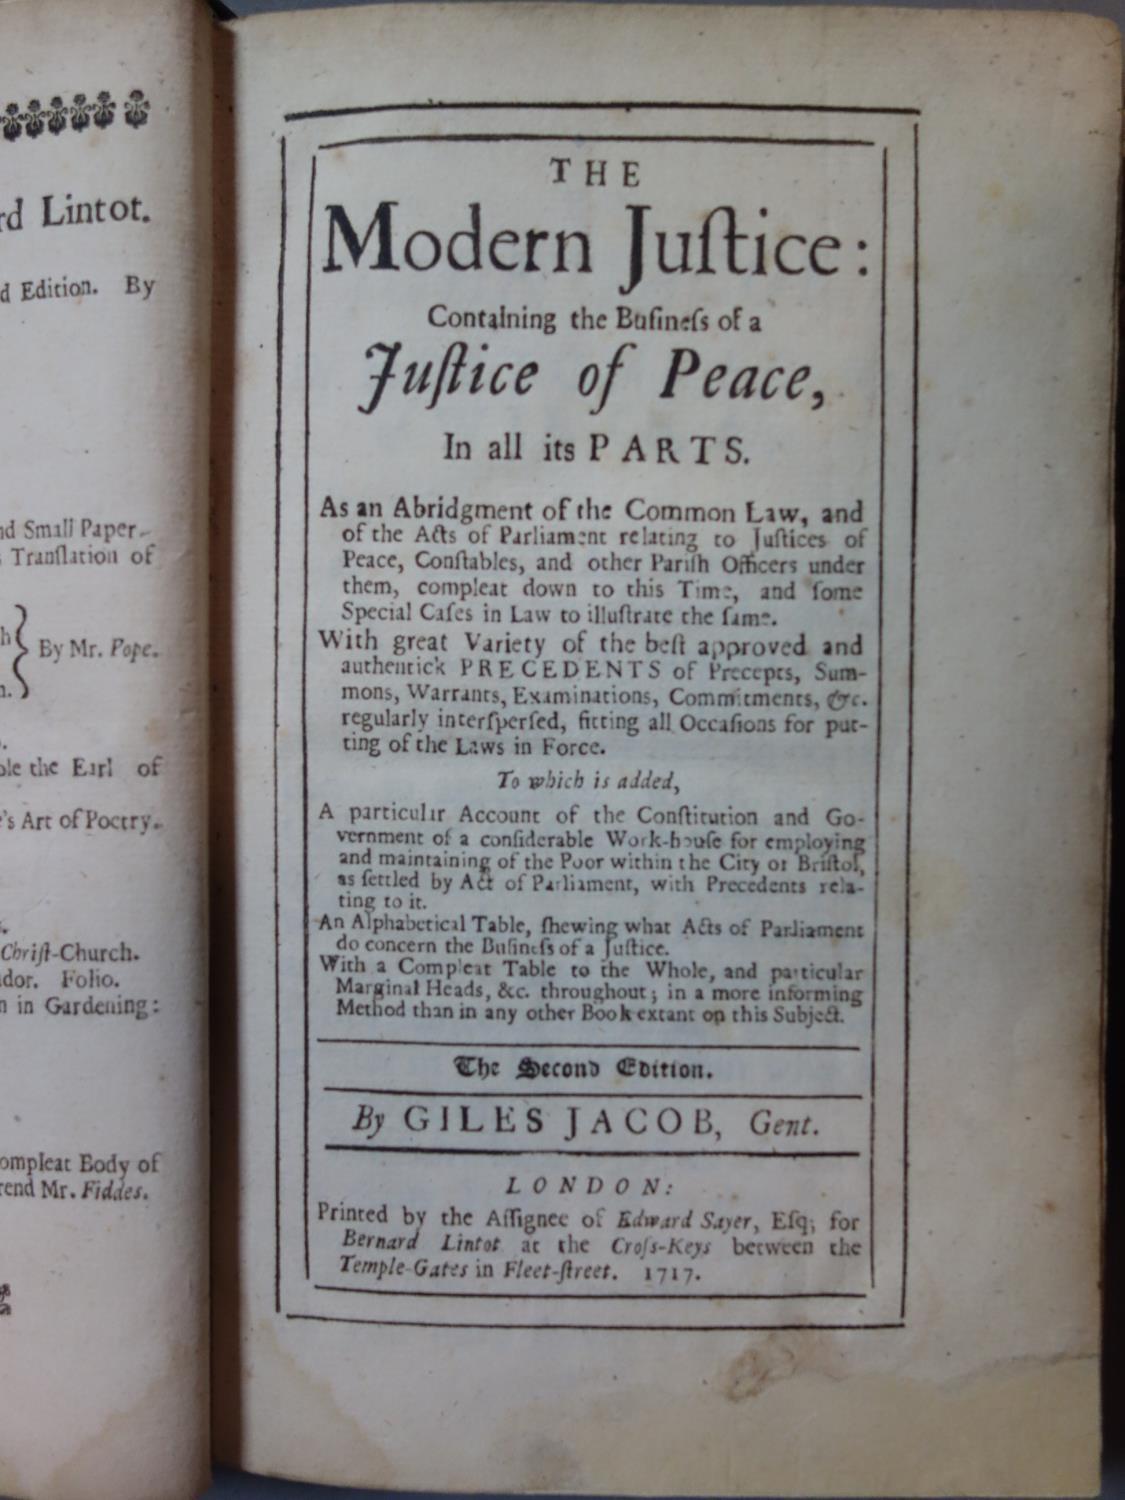 Giles Jacob, The Modern Justice - Containing the Business of a Justice of Peace in all its Parts, - Image 3 of 3